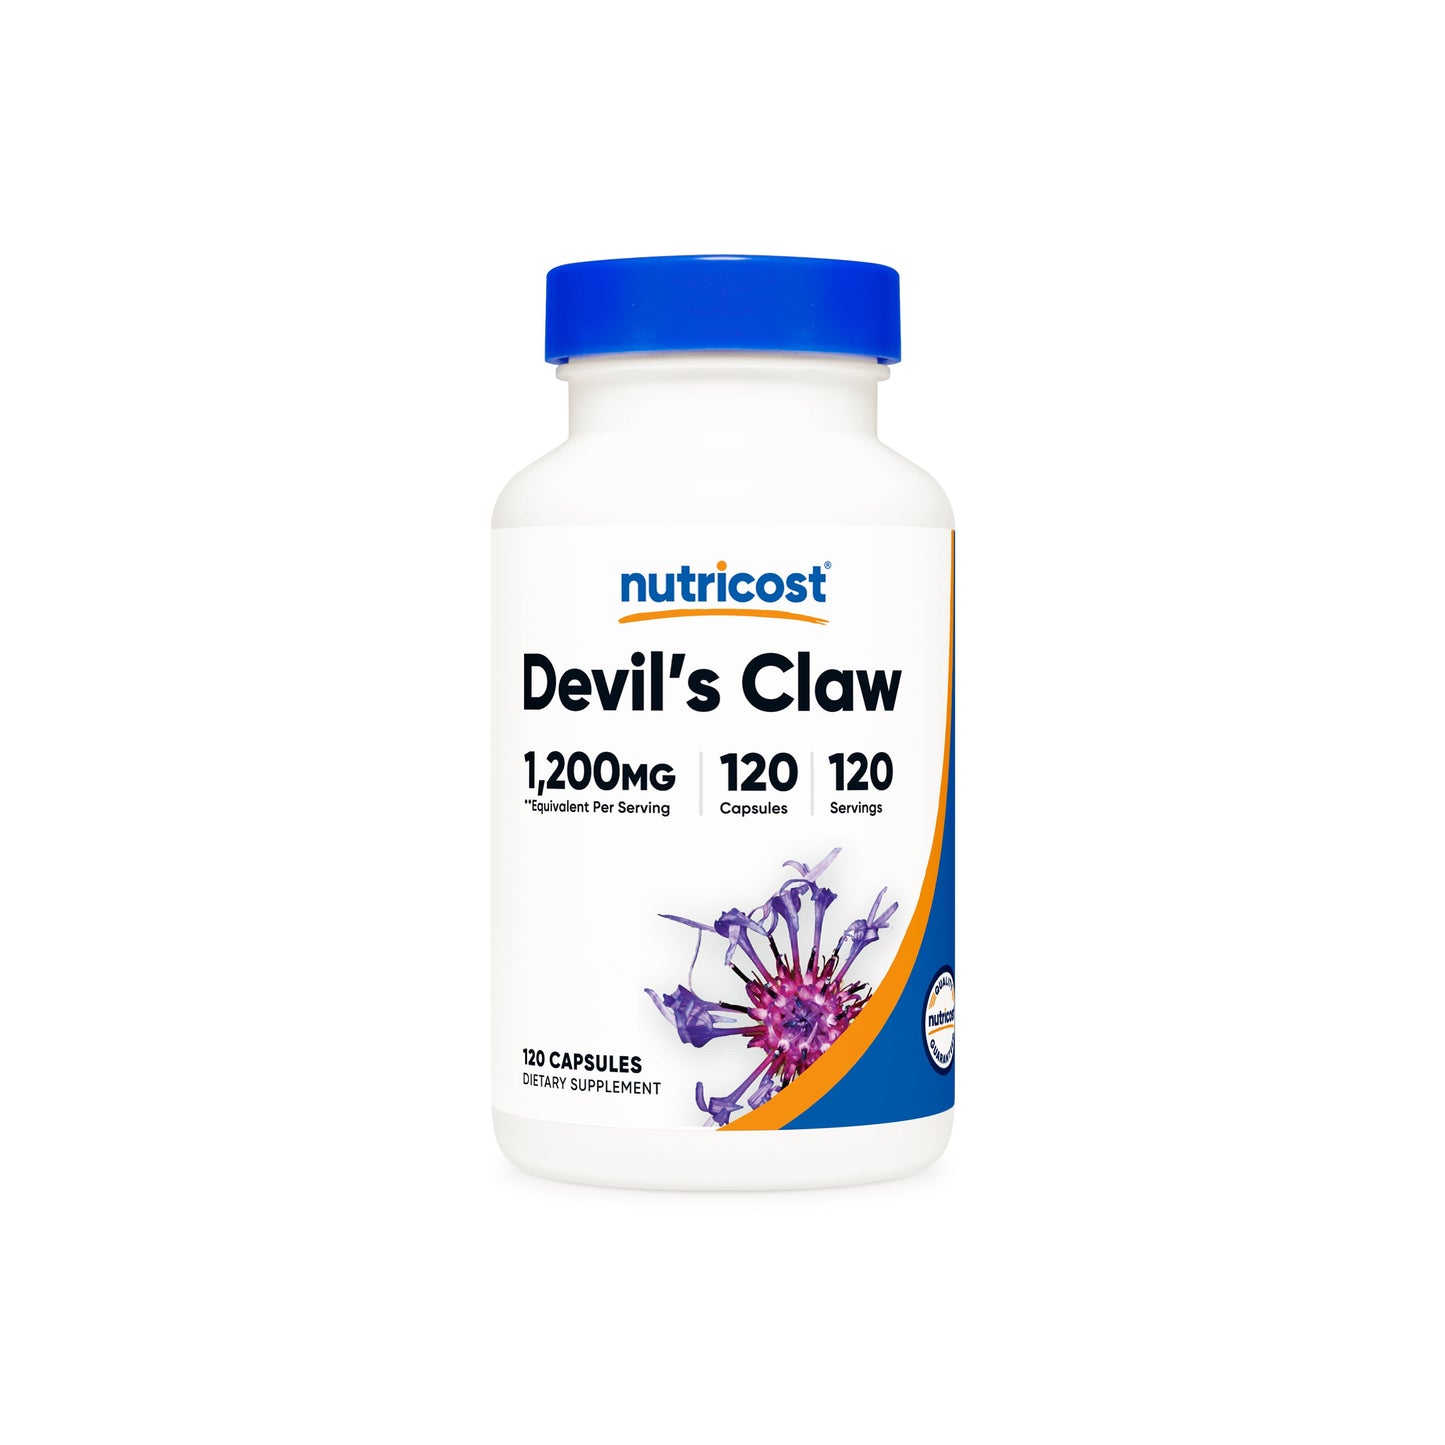 Nutricost Devil's Claw